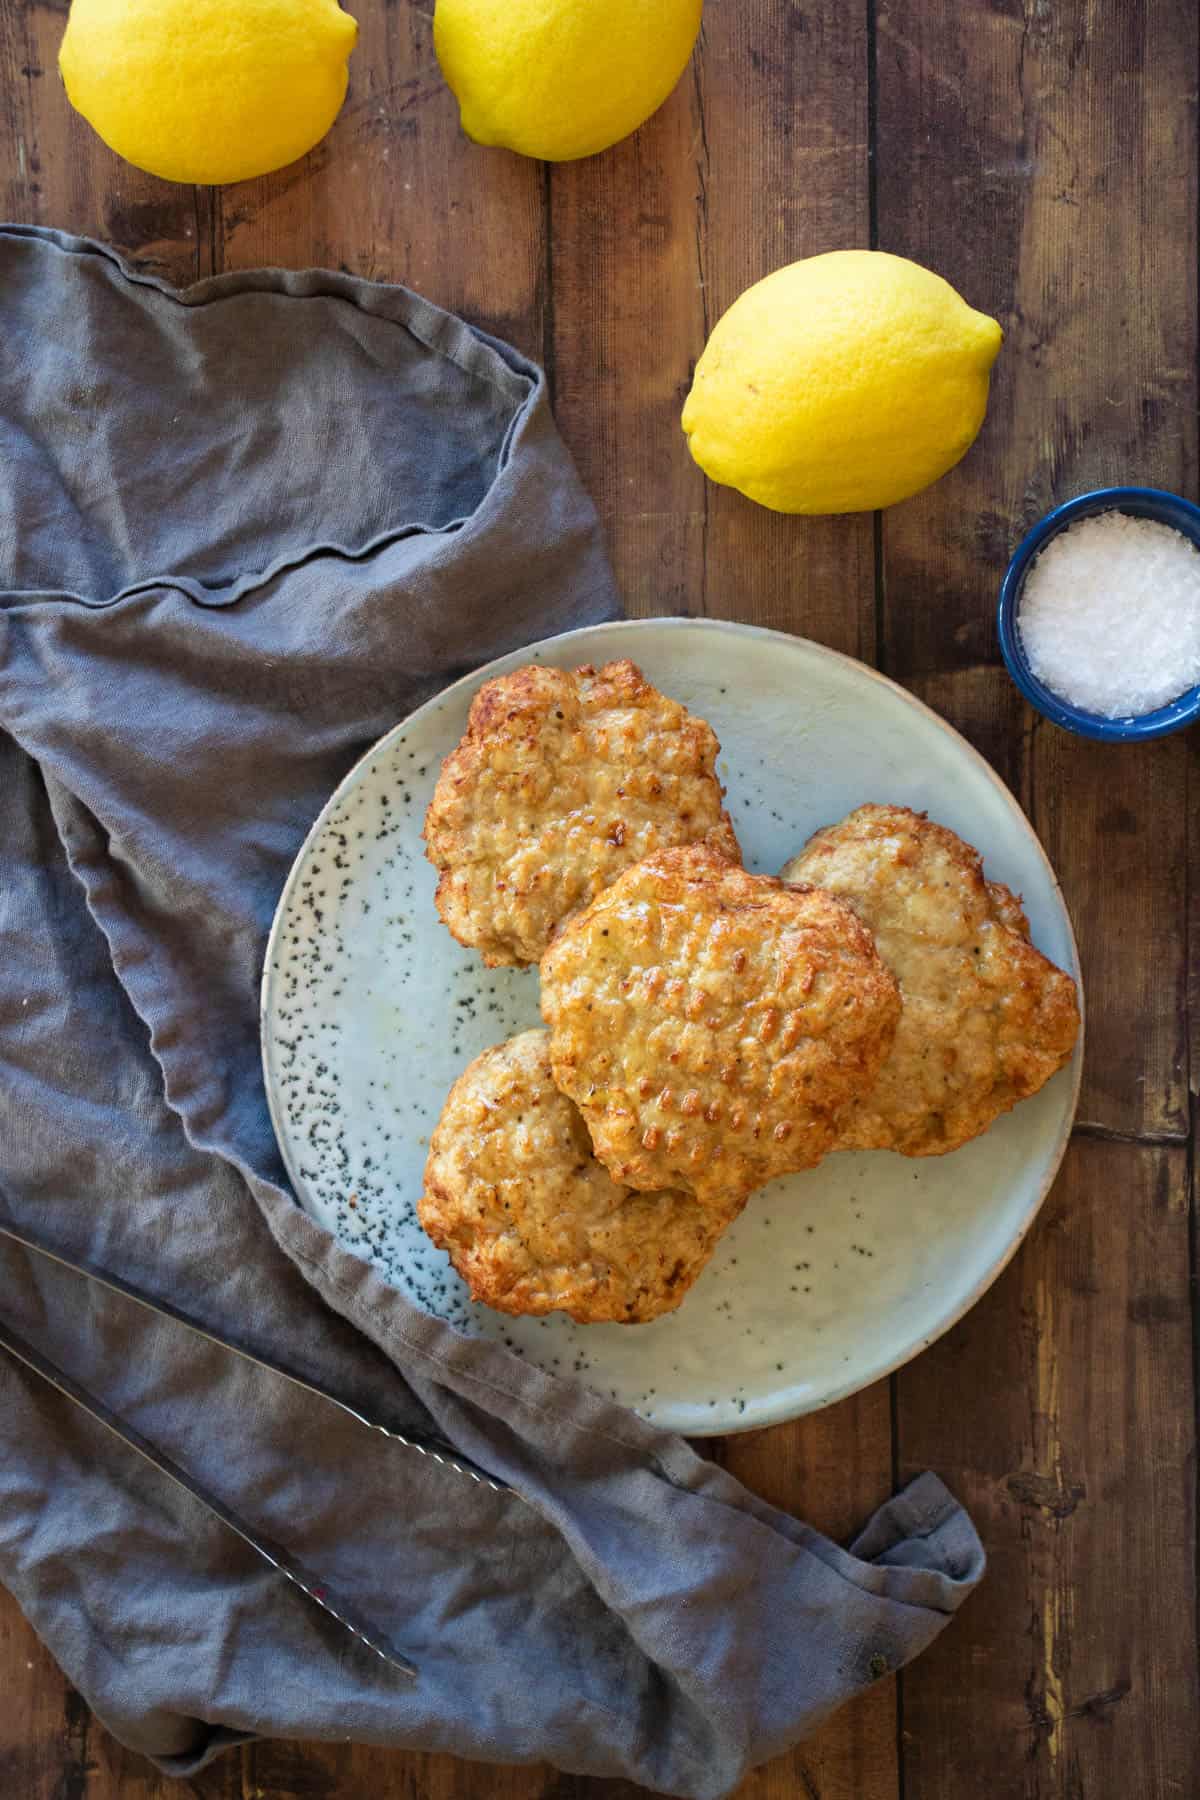 Chicken patties on a blue plate.